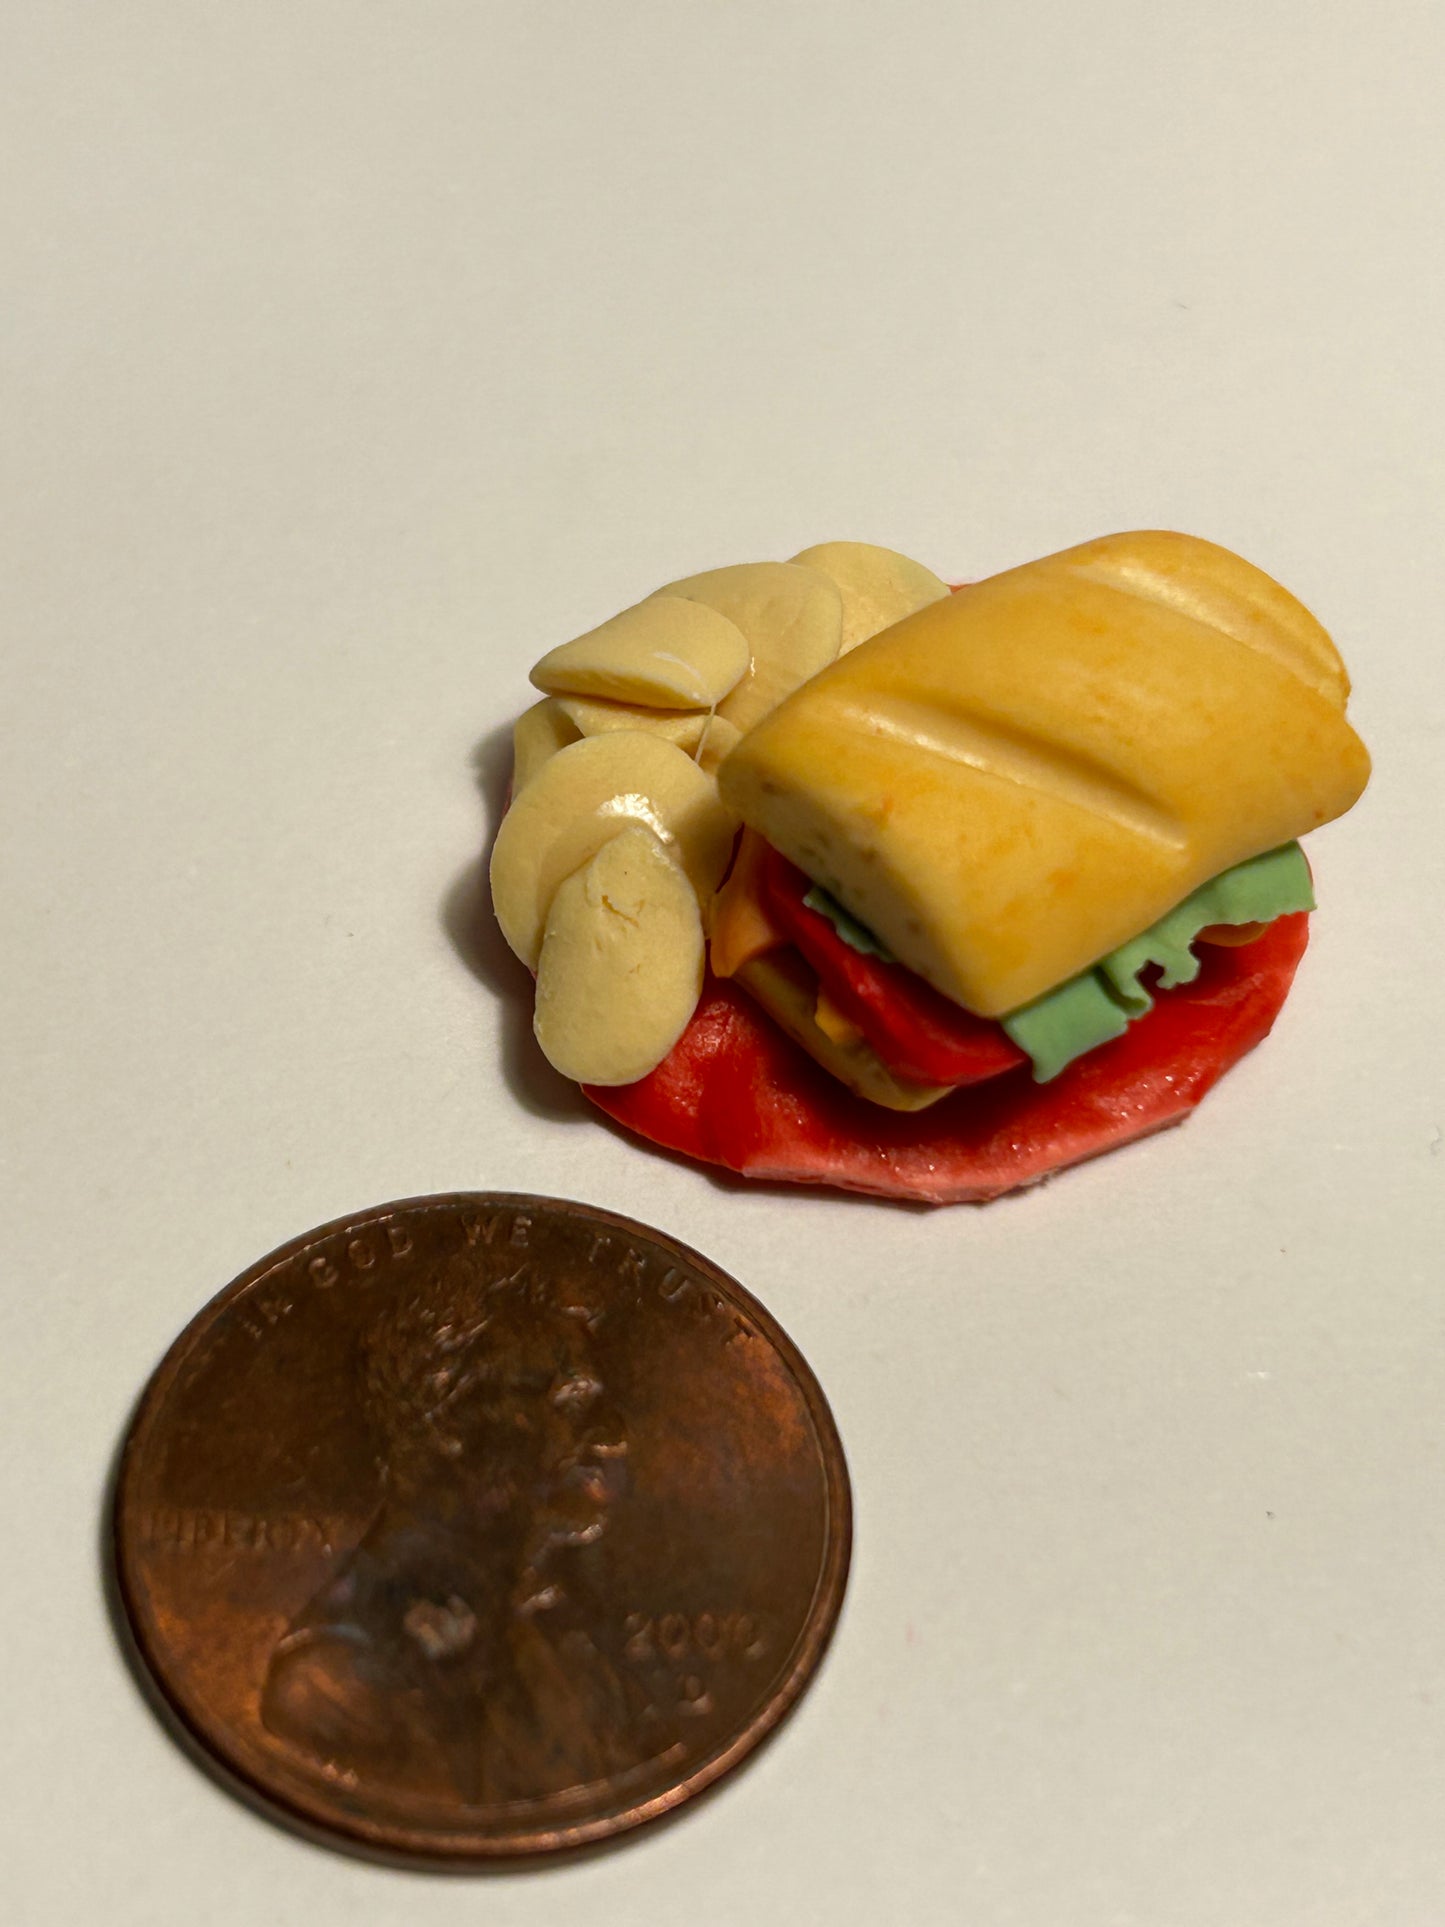 Miniature sandwich and chips